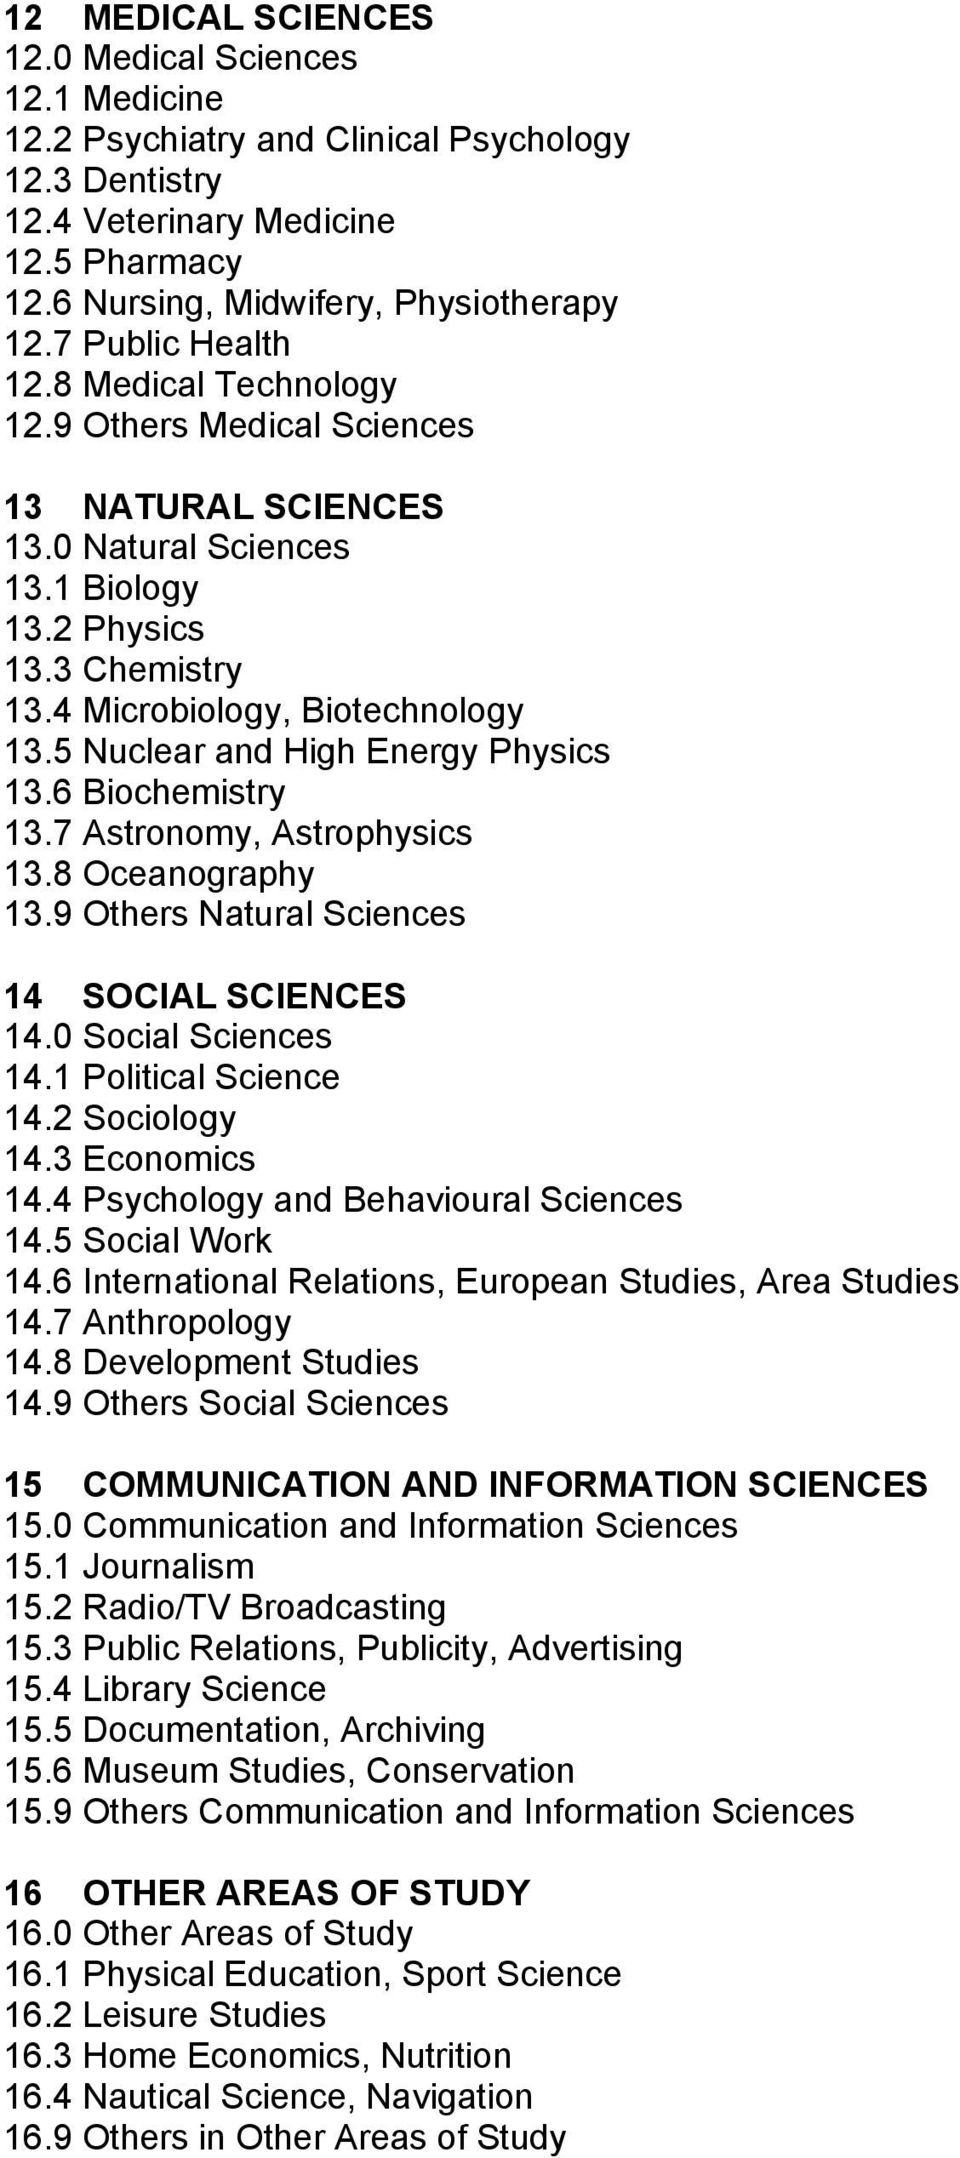 5 Nuclear and High Energy Physics 13.6 Biochemistry 13.7 Astronomy, Astrophysics 13.8 Oceanography 13.9 Others Natural Sciences 14 SOCIAL SCIENCES 14.0 Social Sciences 14.1 Political Science 14.